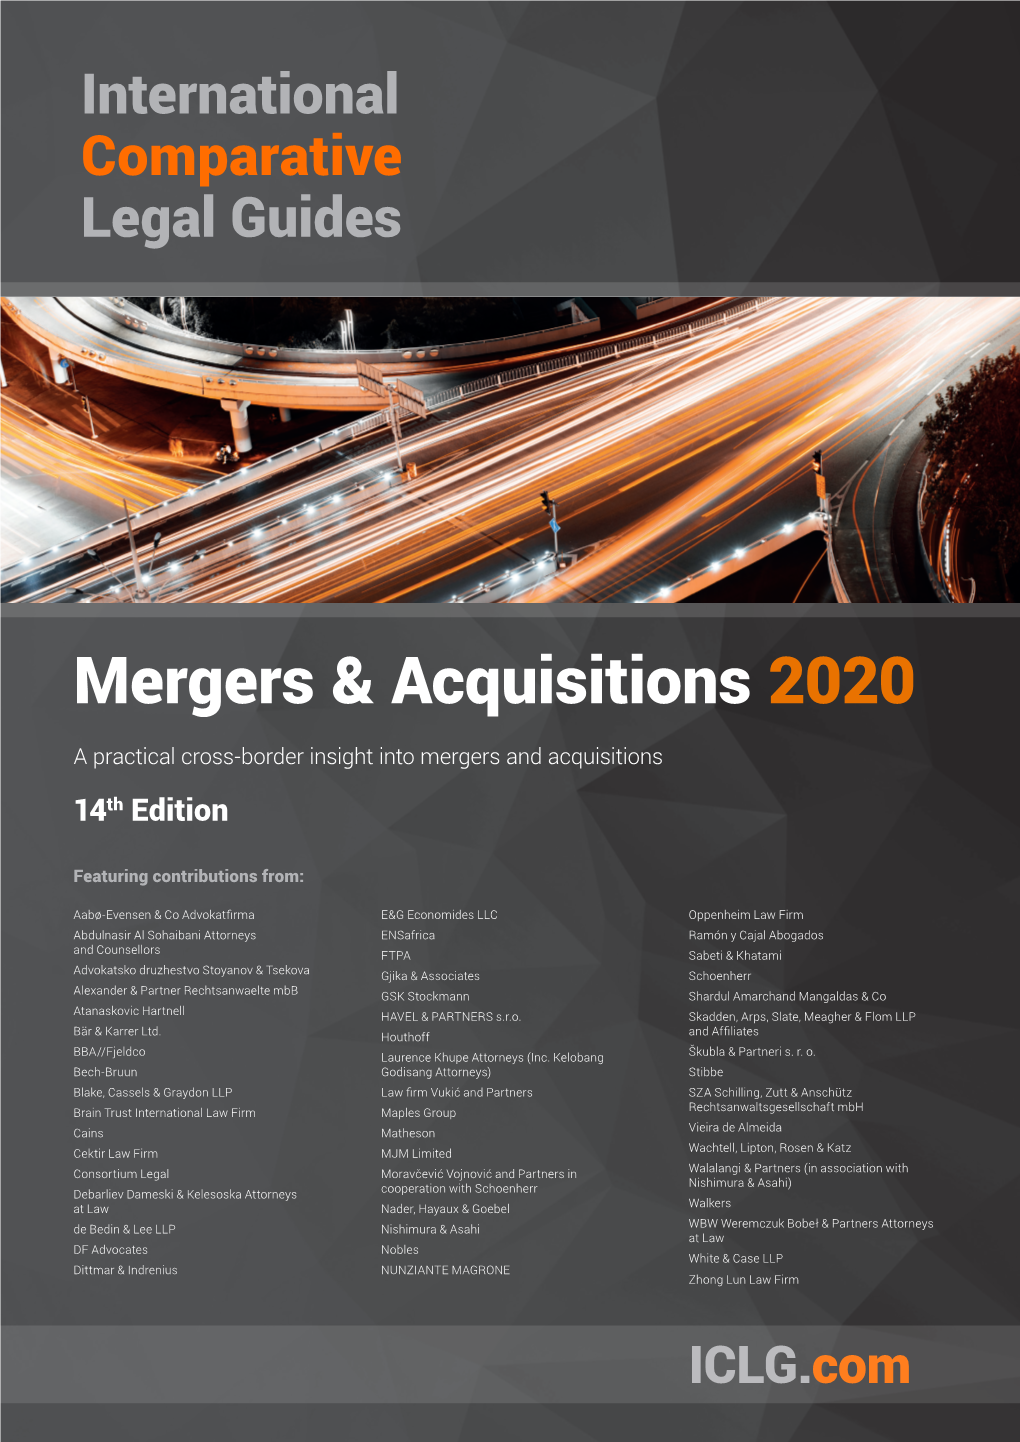 Mergers & Acquisitions 2020